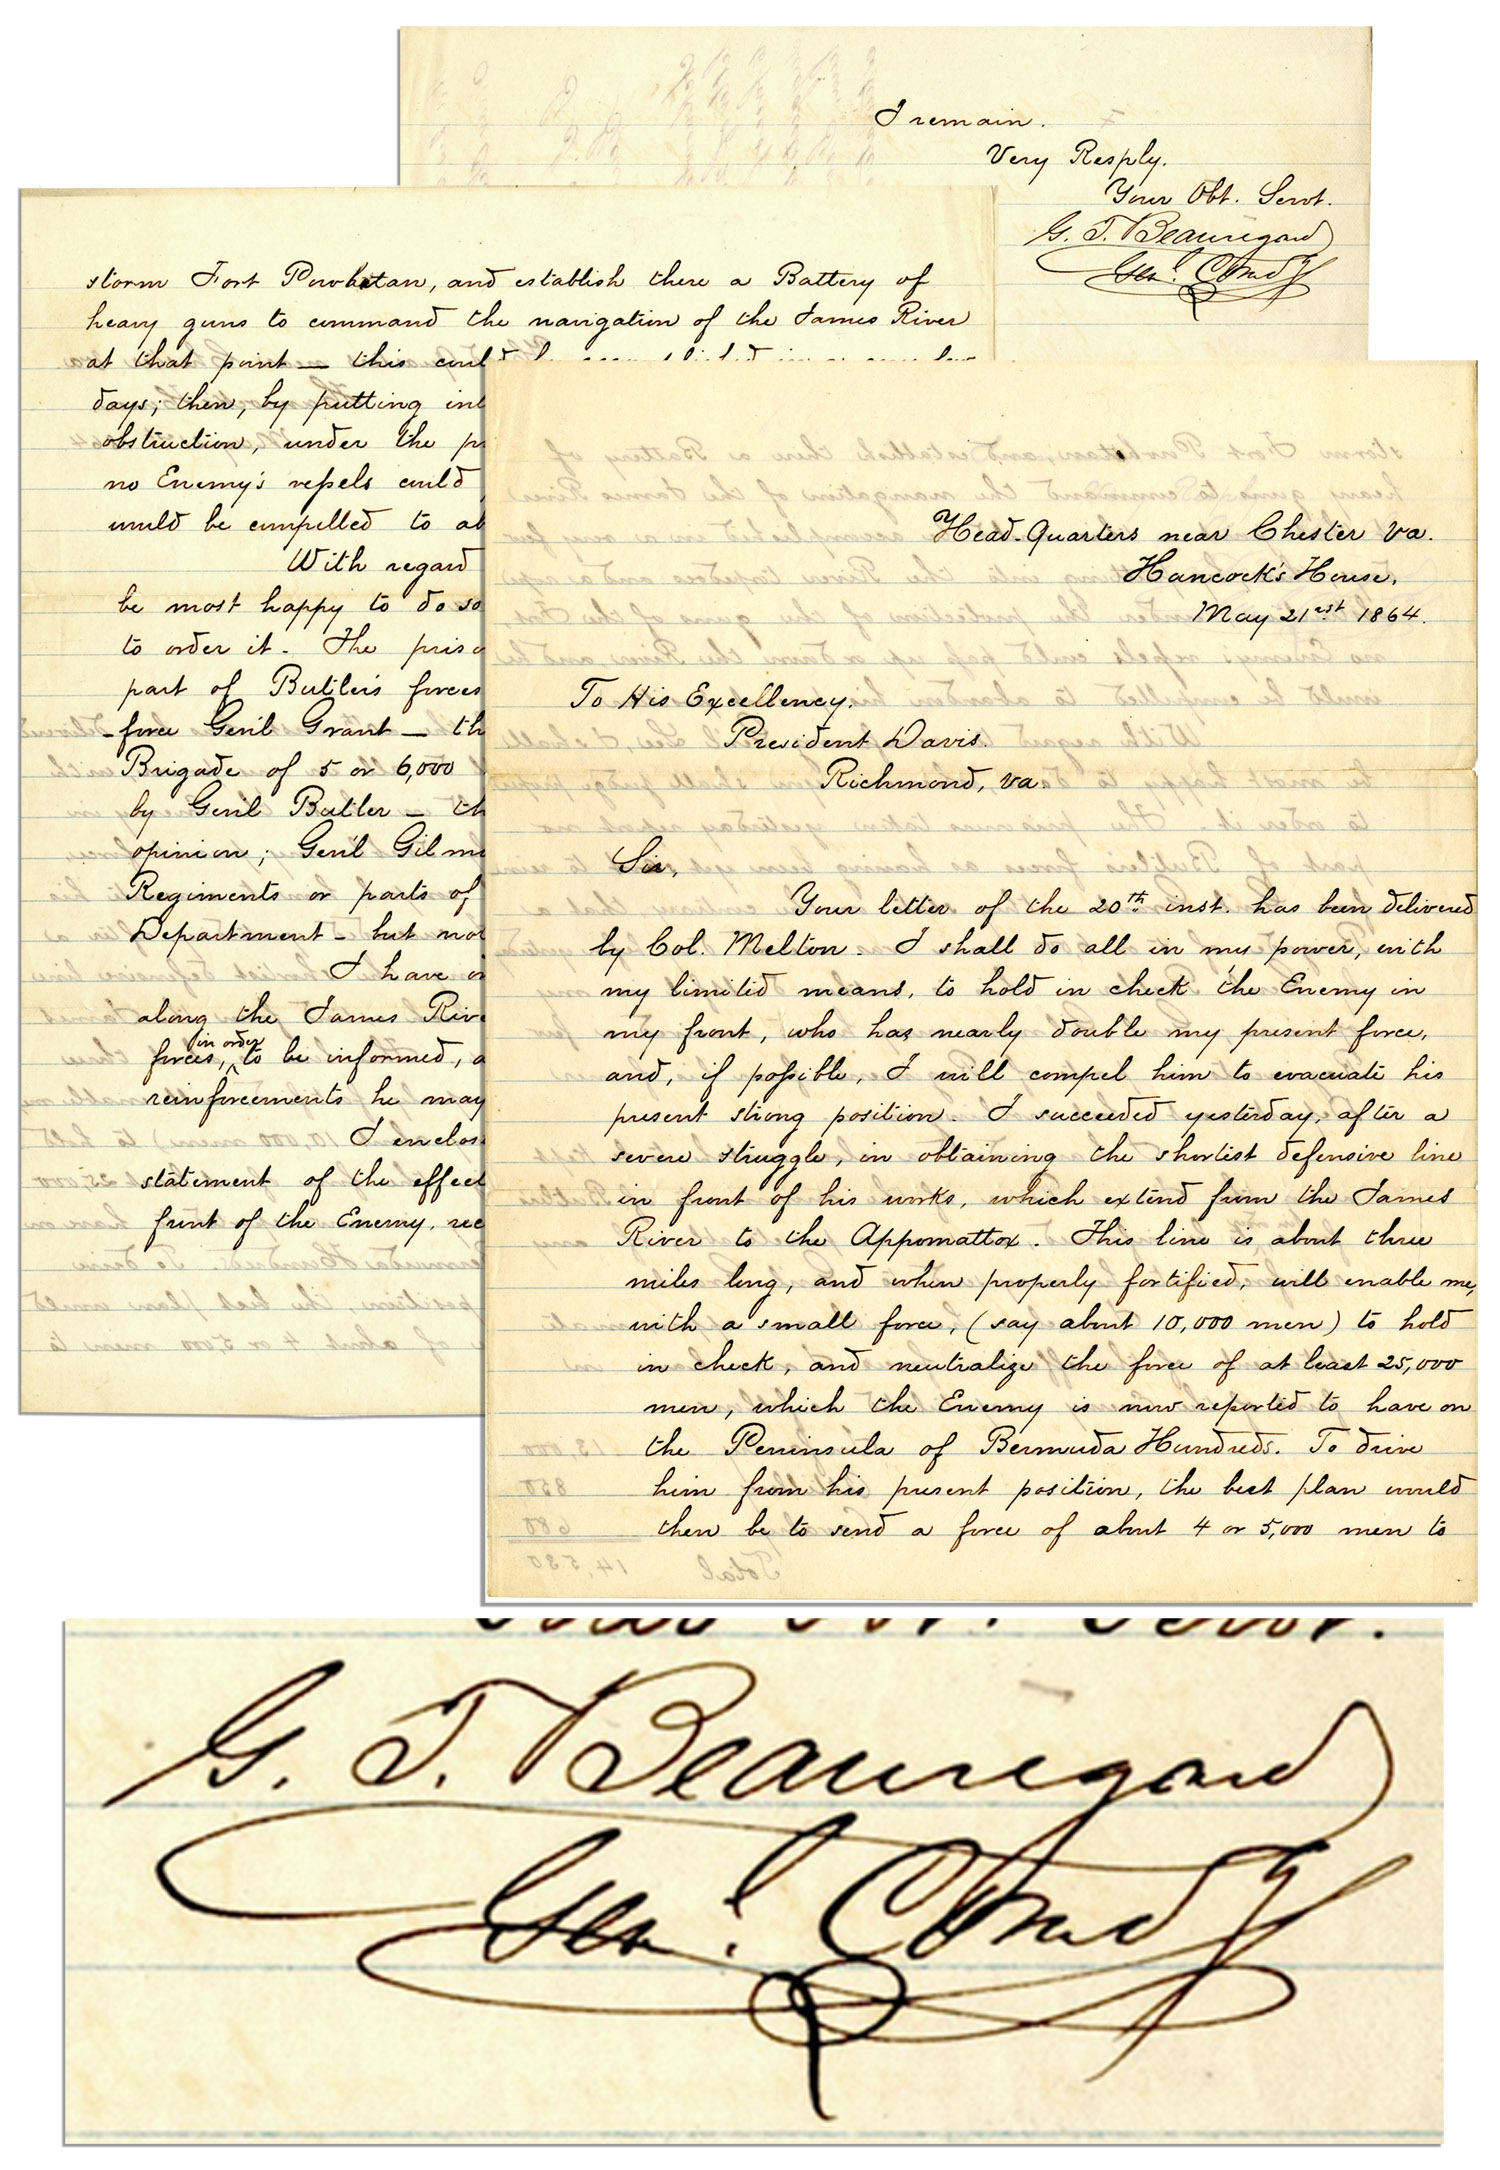 P.G.T. Beauregard Autograph General Beauregard 1864 Letter Signed to Jefferson Davis -- ''...send a force of...4 or 5,000 to storm Fort Powhatan and...command...the James River...'' -- One Day After Bermuda Hundred